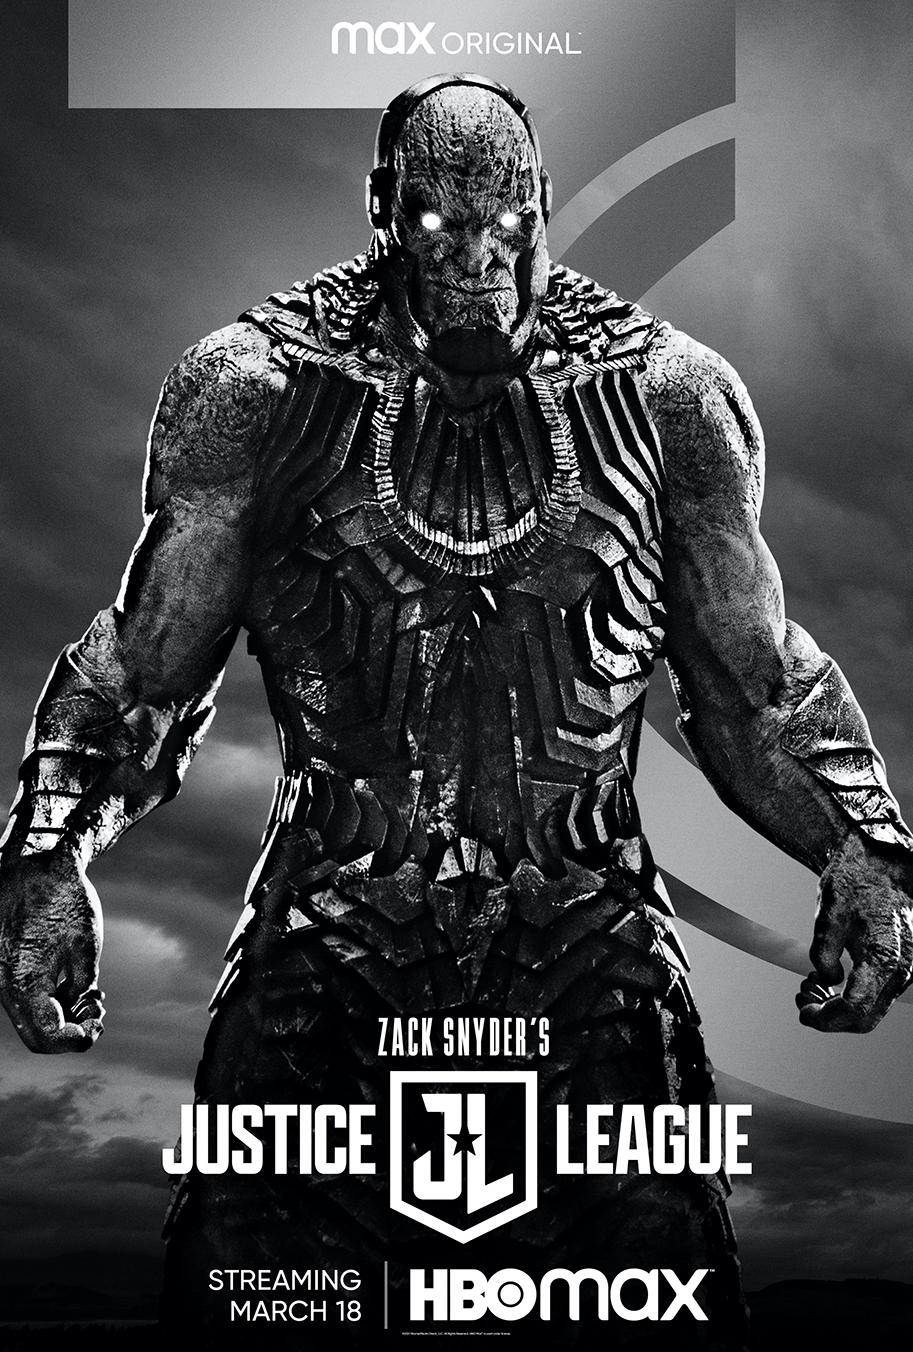 Zack Snyder, Justice League, Darkseid, poster, HBO Max